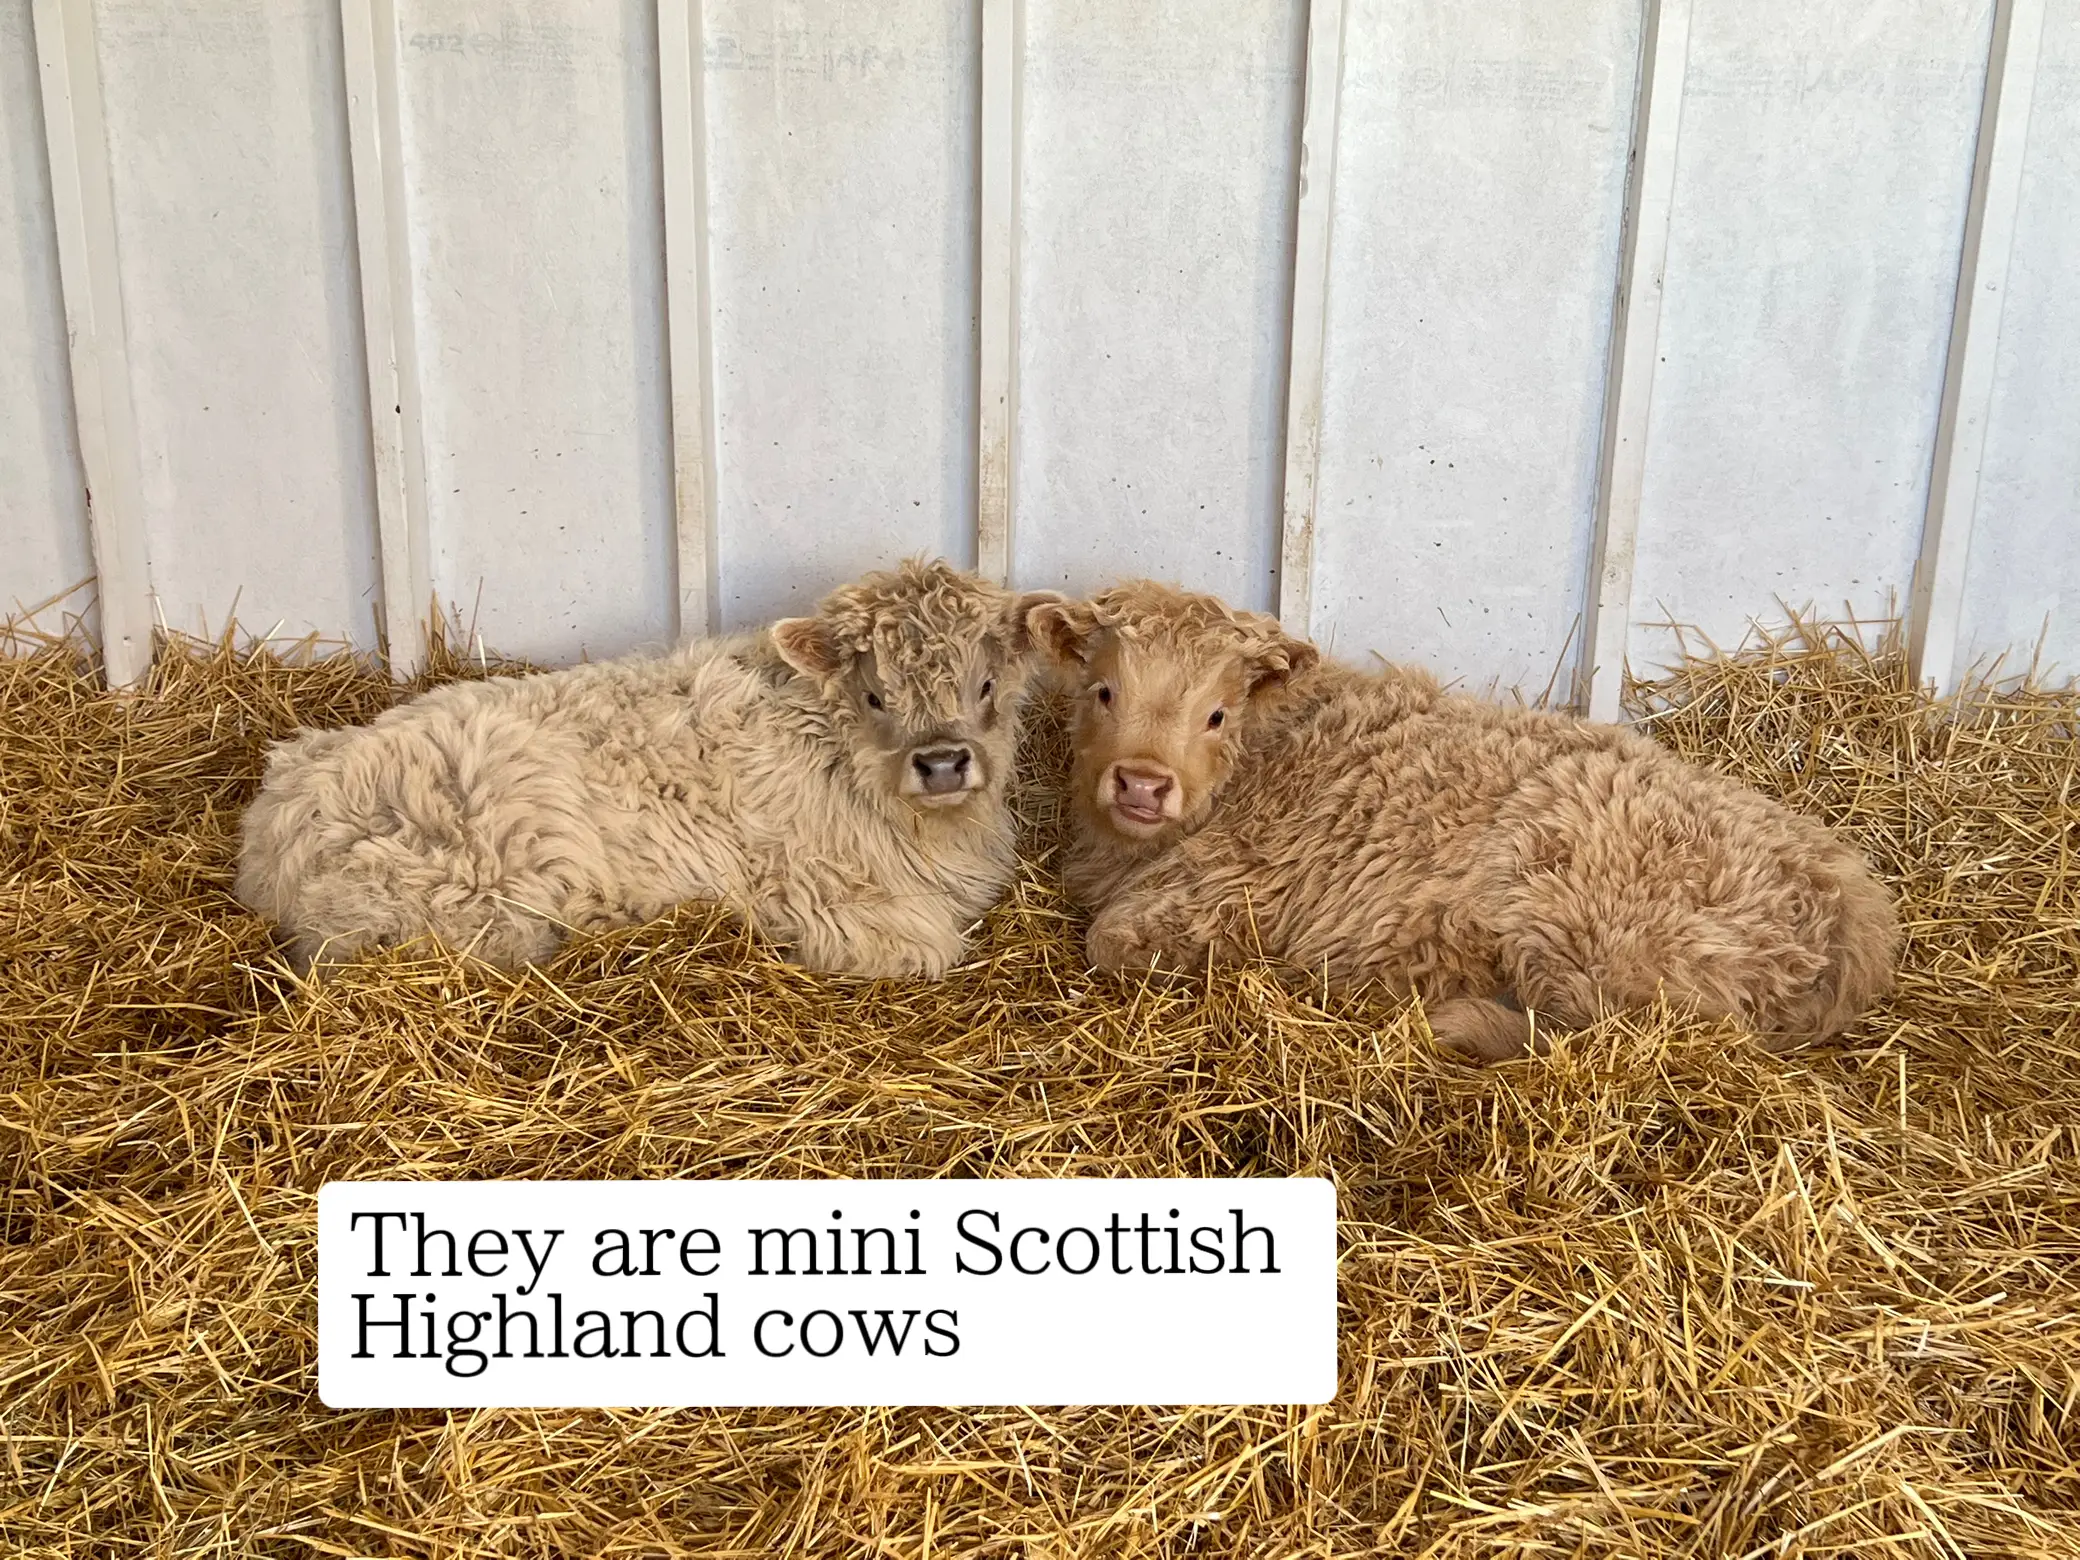 Spoiled' Mini Highland Cow That Acts Like a Dog Is Just Too Cute